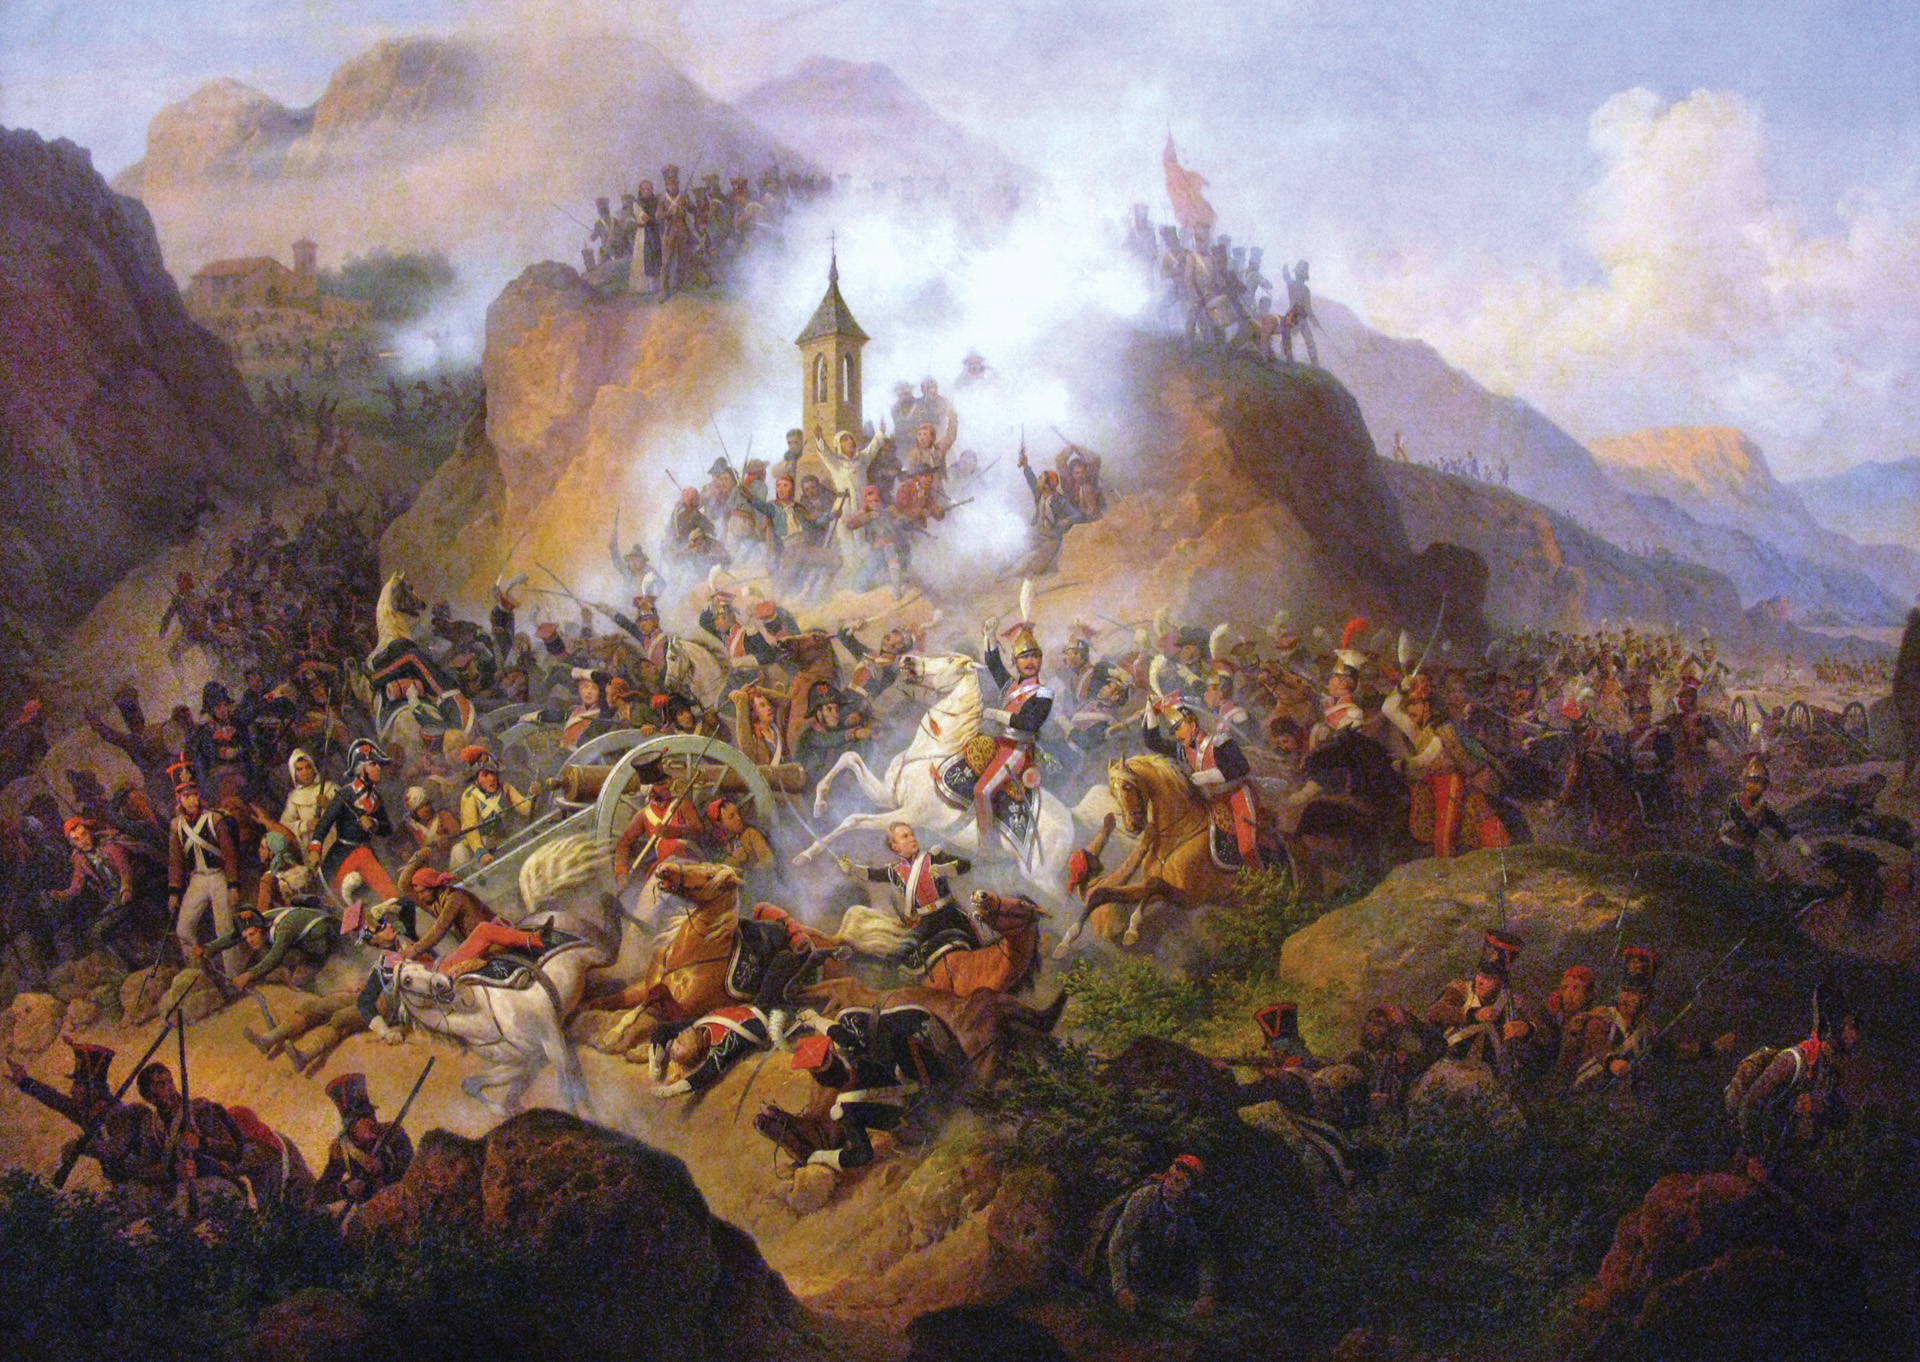 Napoleon sent badly needed reinforcements to the top of the mountain pass to ensure that his cavalry were successful in clearing the road to Madrid. The spectacular success of the charge of the Polish Light Cavalry guaranteed victory that day and helped erase the humiliation of Bailén.